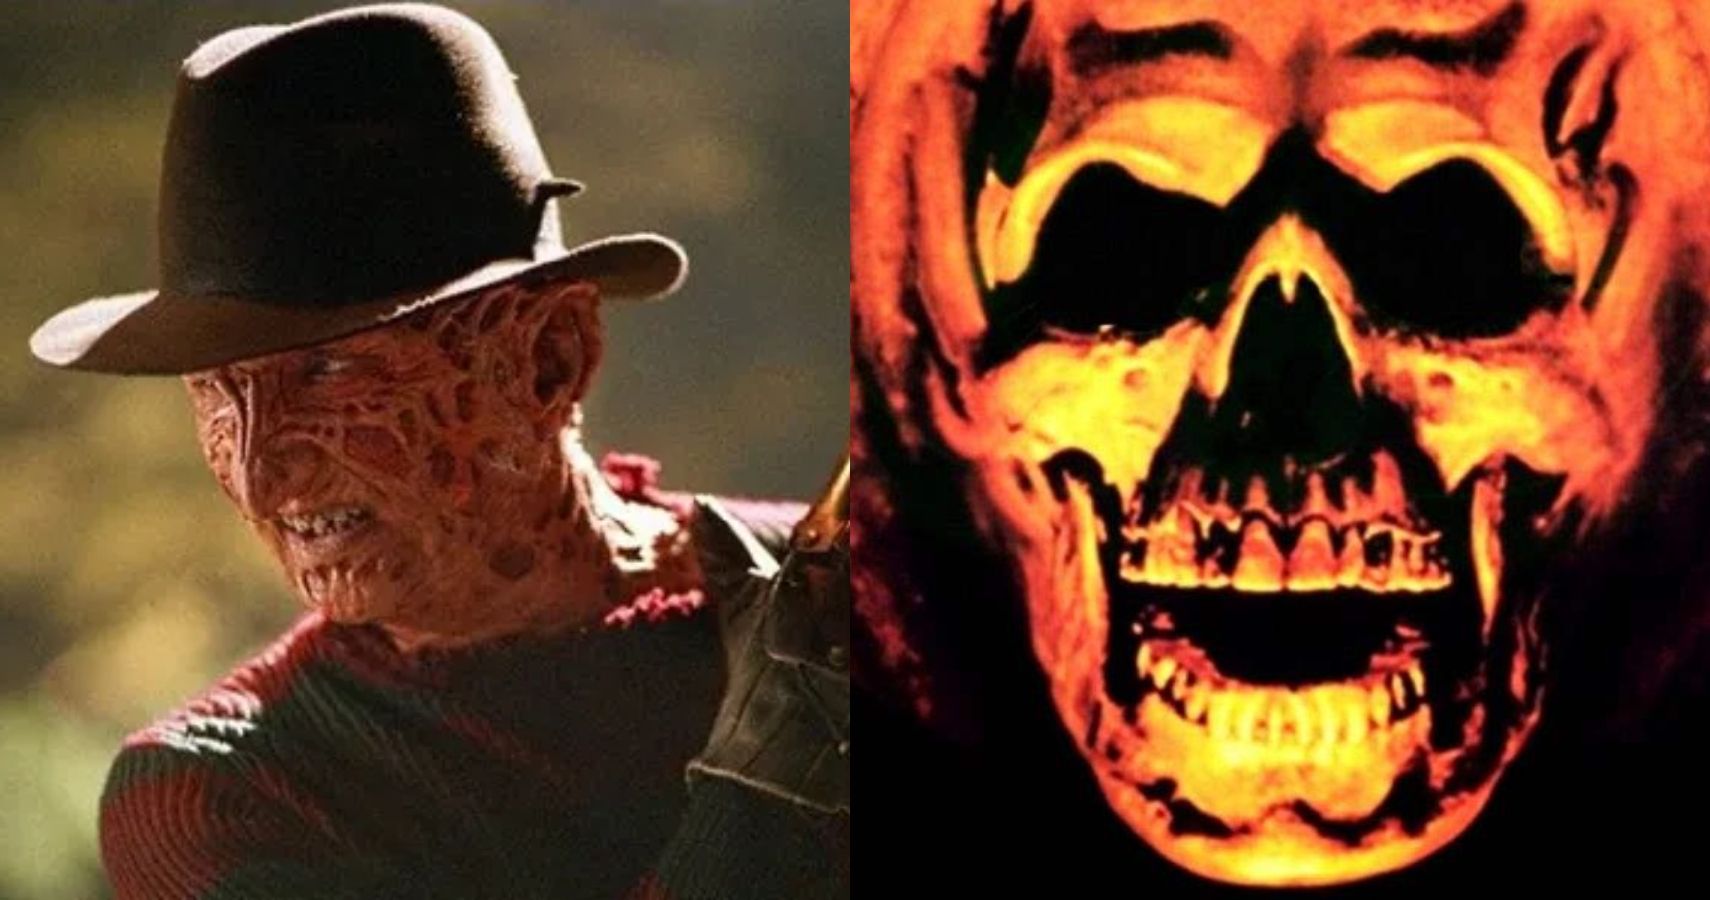 10 Horror Movies From the 80s You Need To Watch Before AHS: 1984